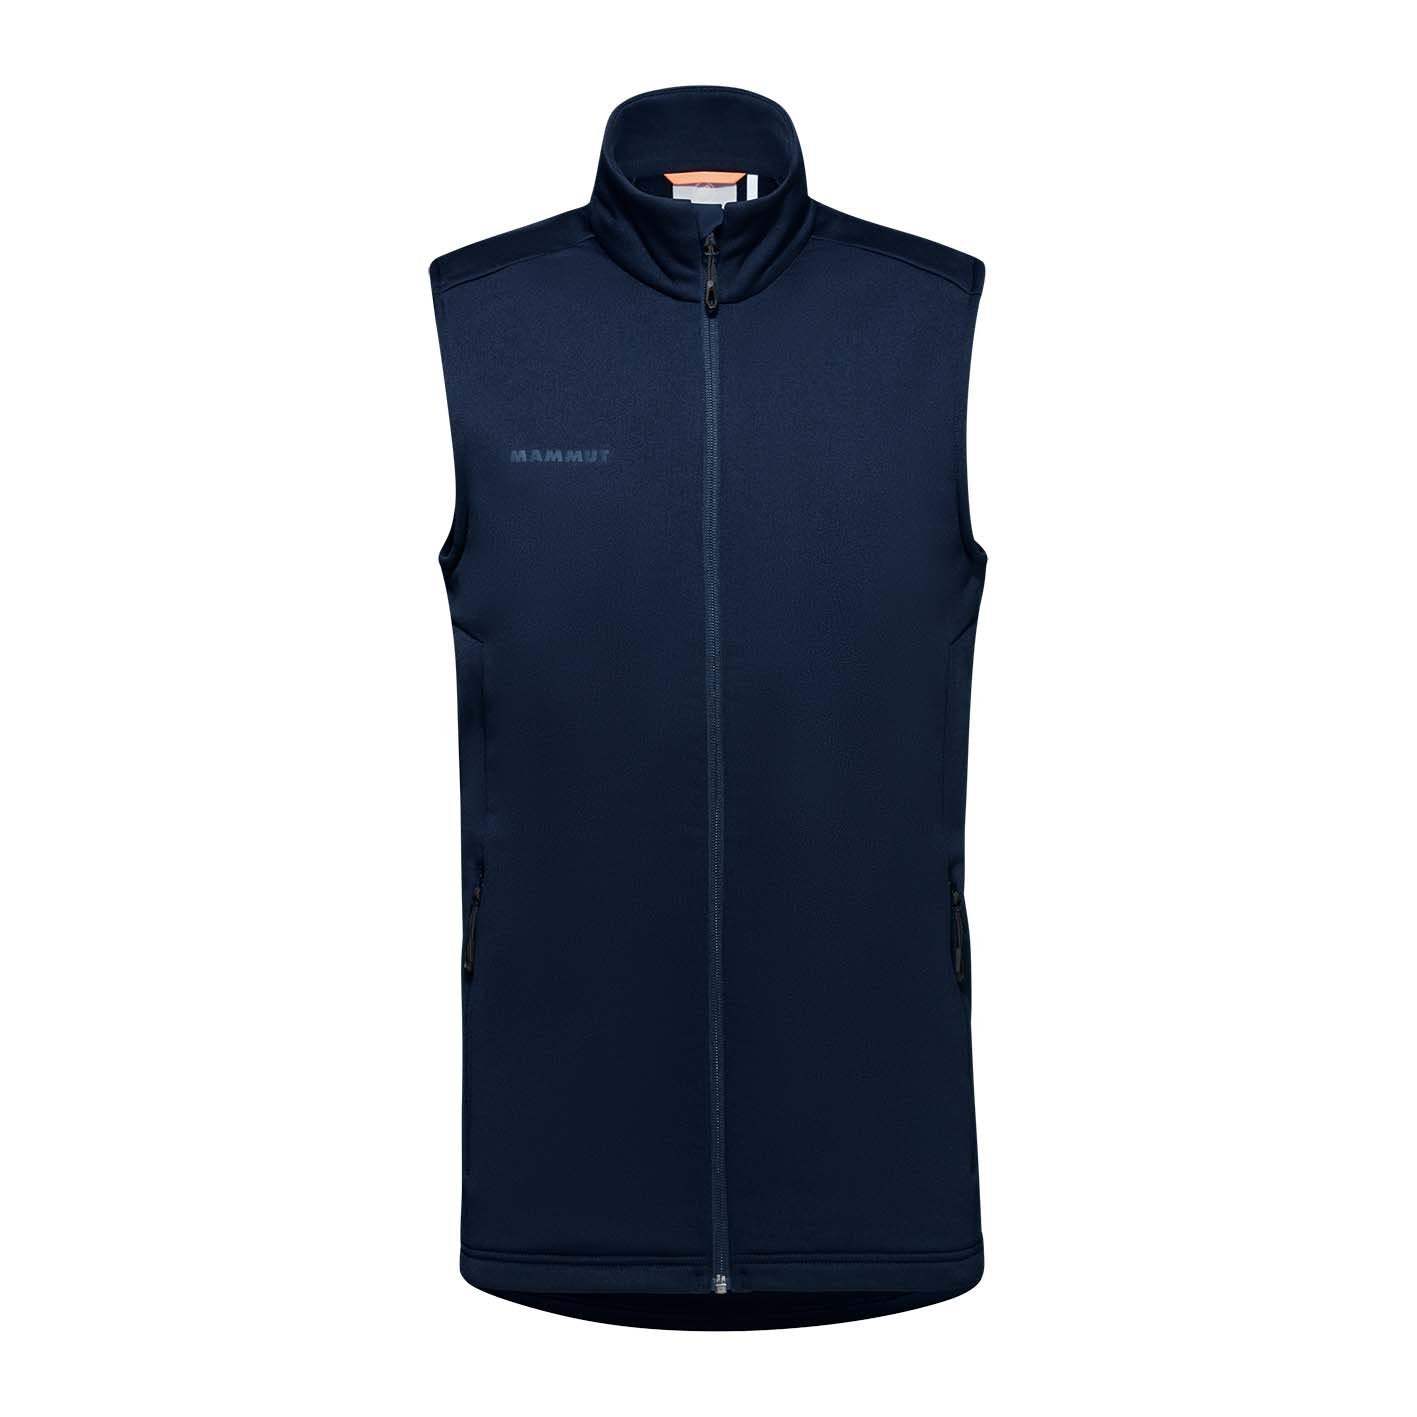 Men's Corporate ML Vest by Mammut - The Luxury Promotional Gifts Company Limited